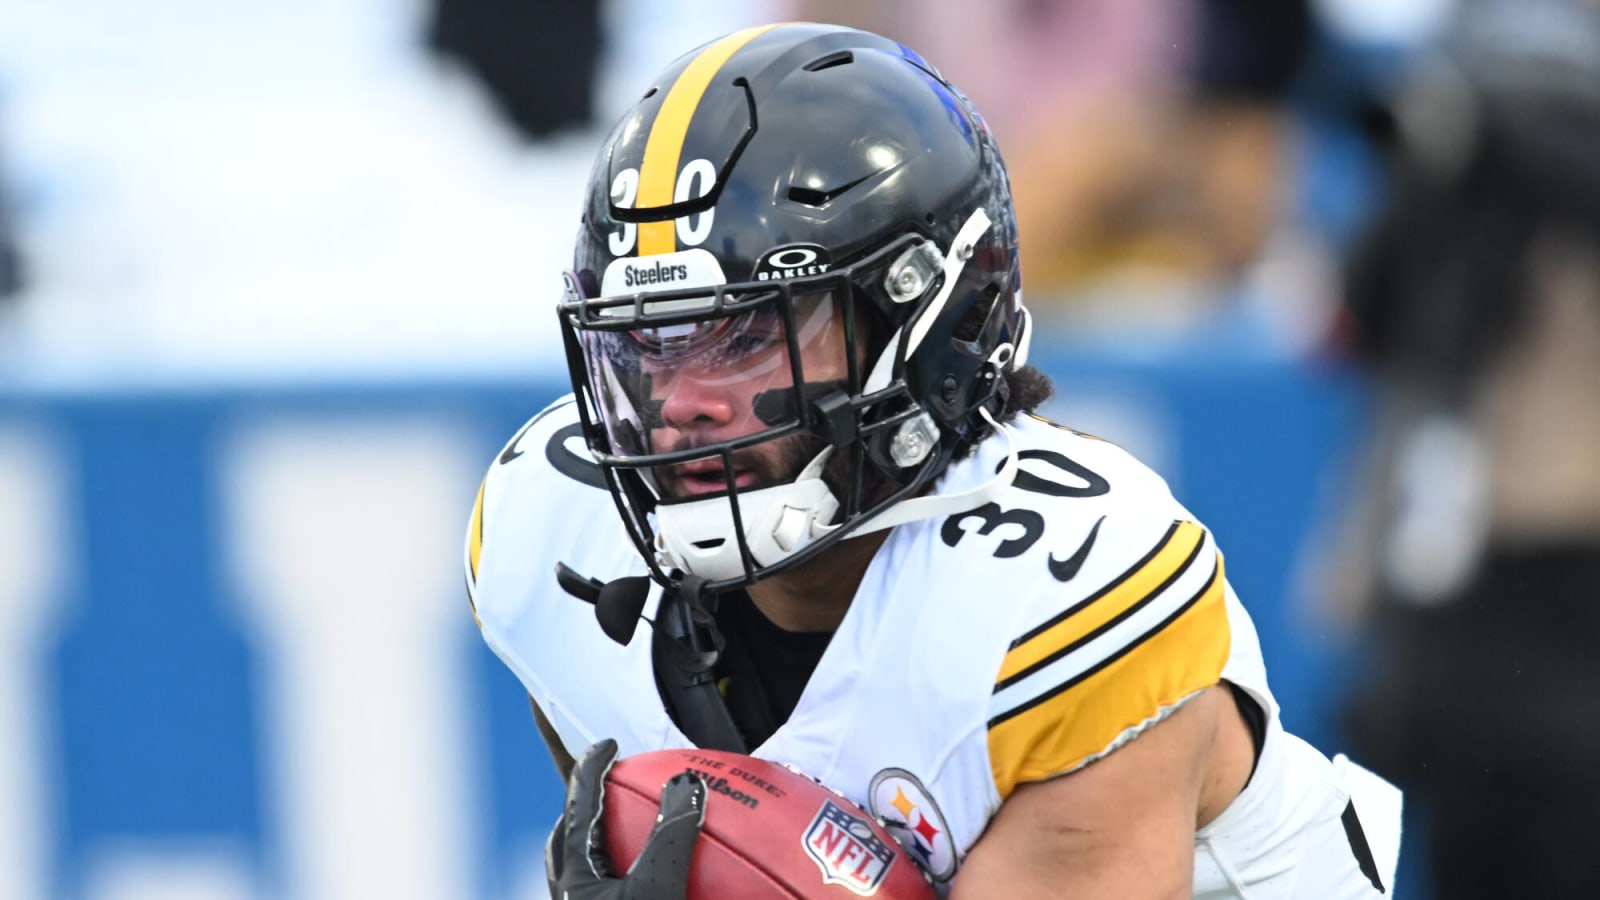 Jaylen Warren has durability questioned if Steelers are 'giving him 30 touches' per game